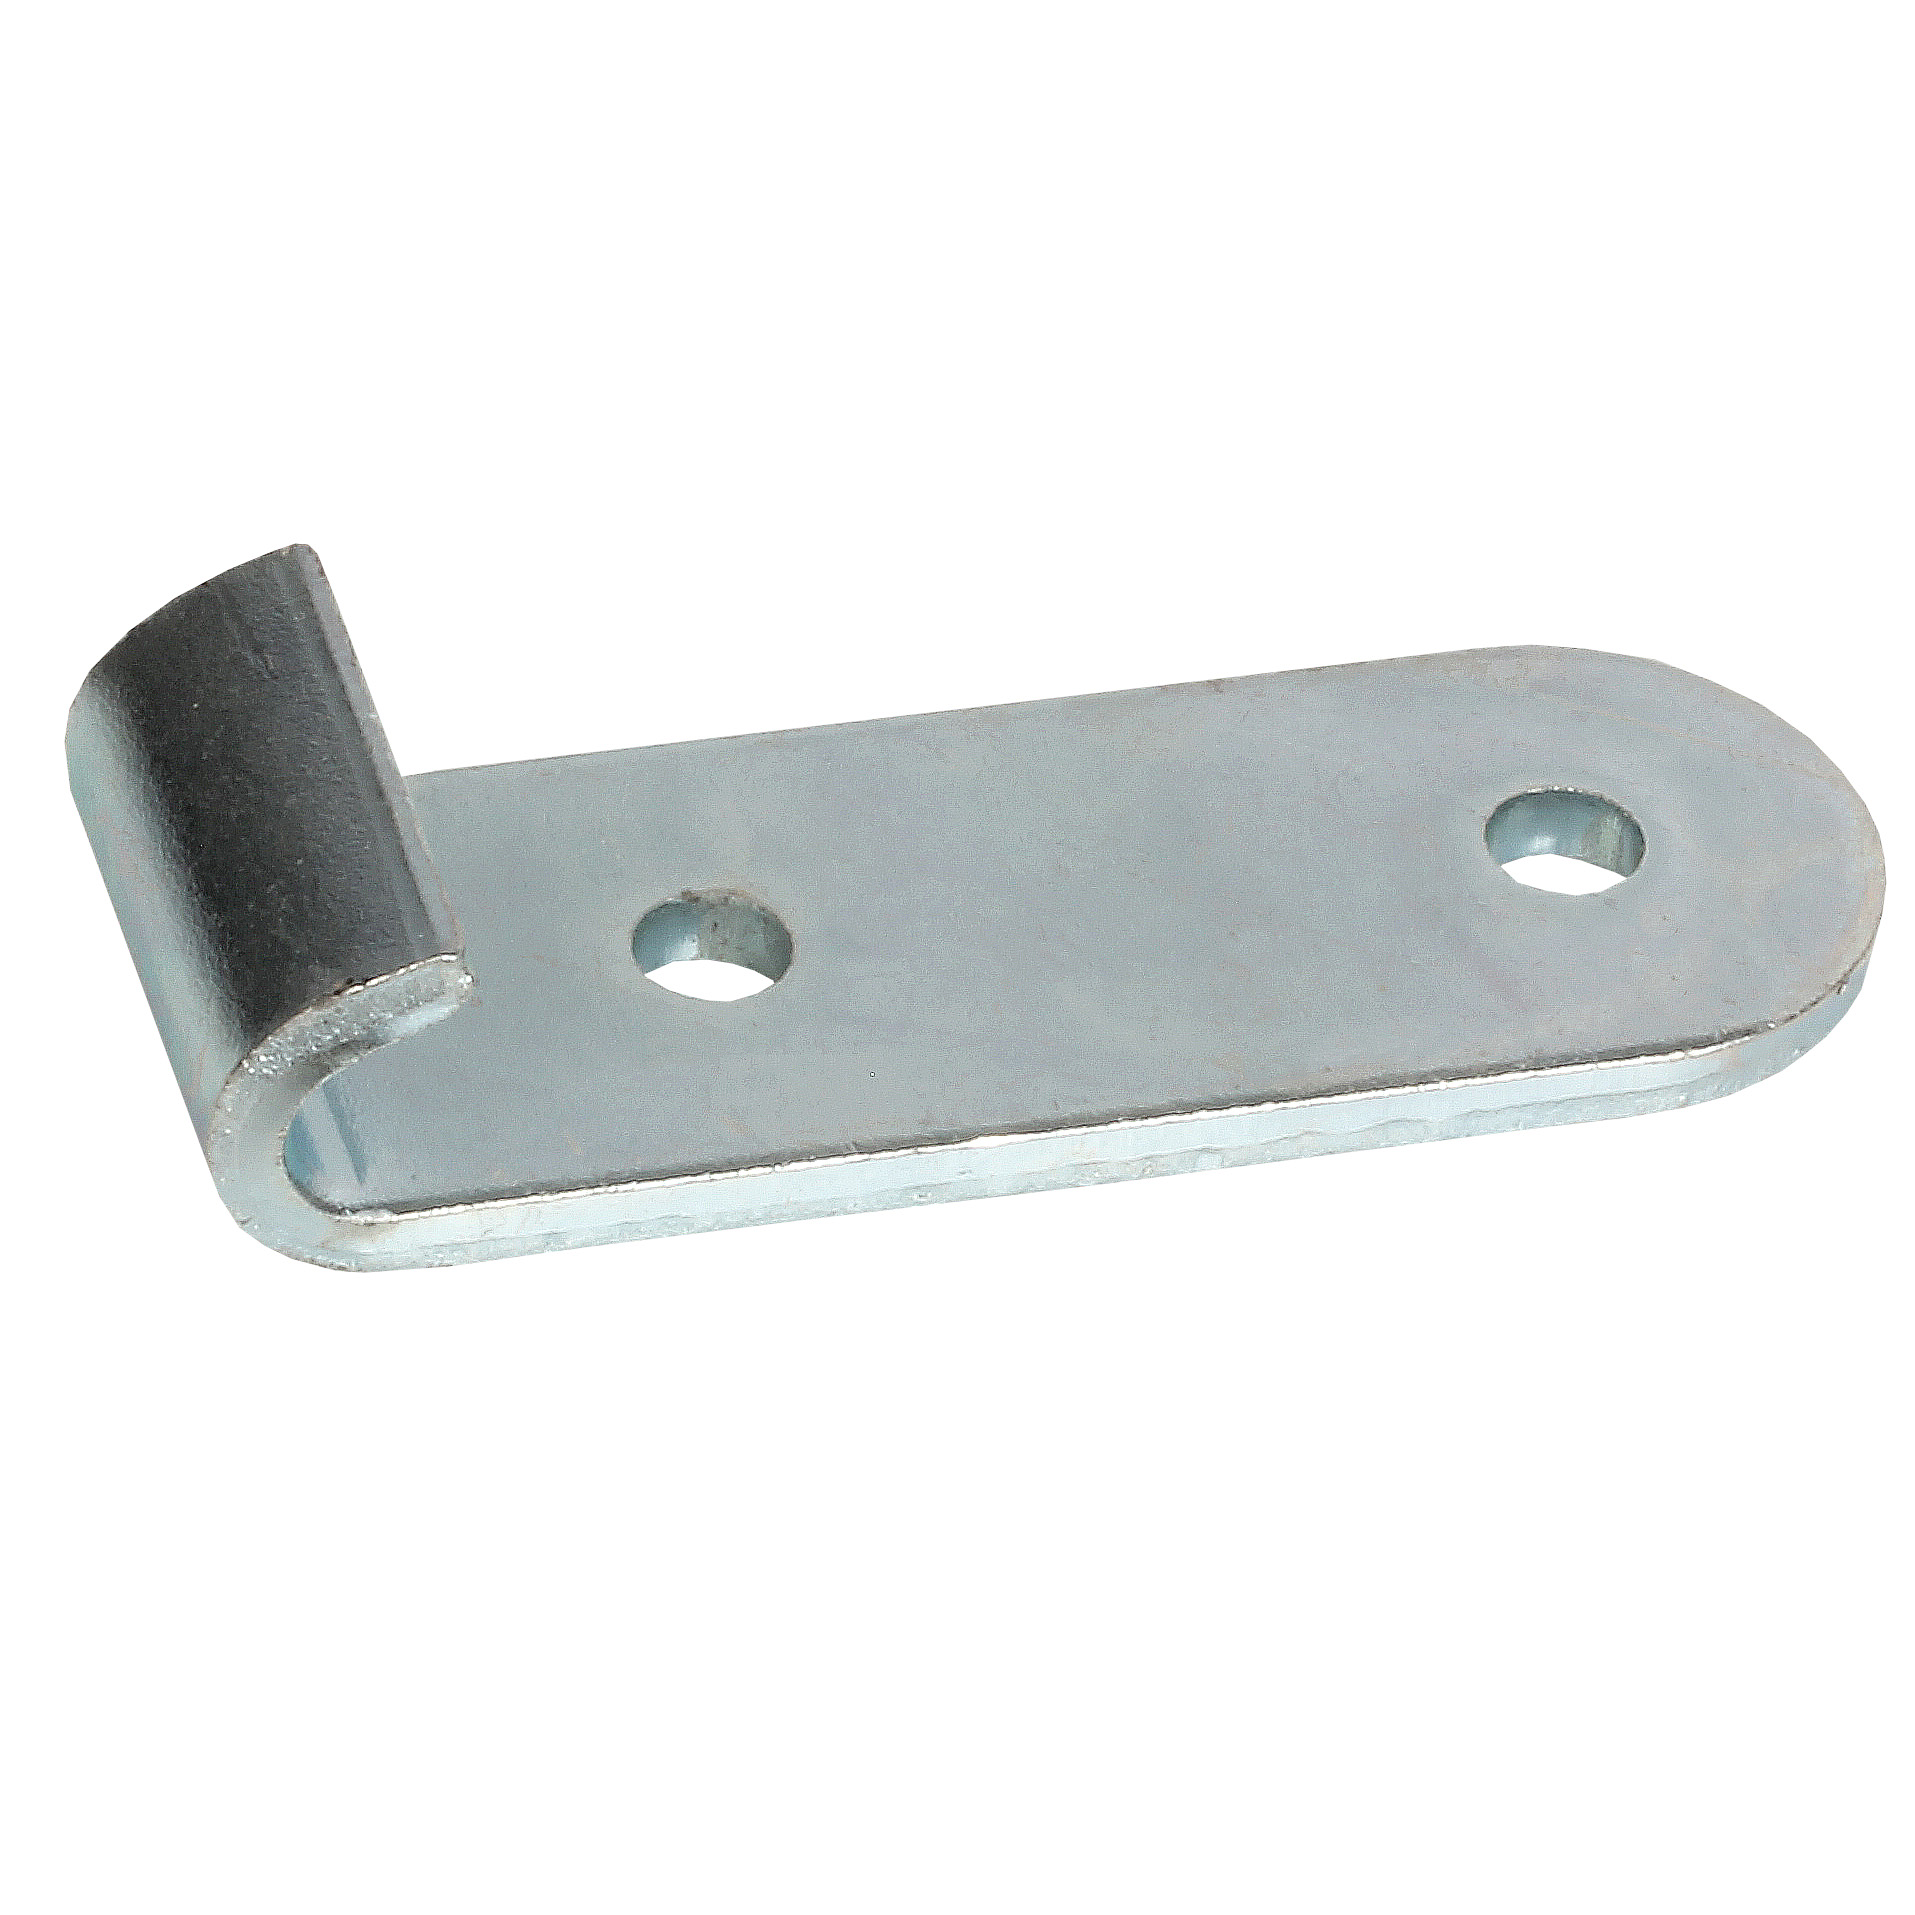 Strike for toggle latch - 22mm - Steel - 